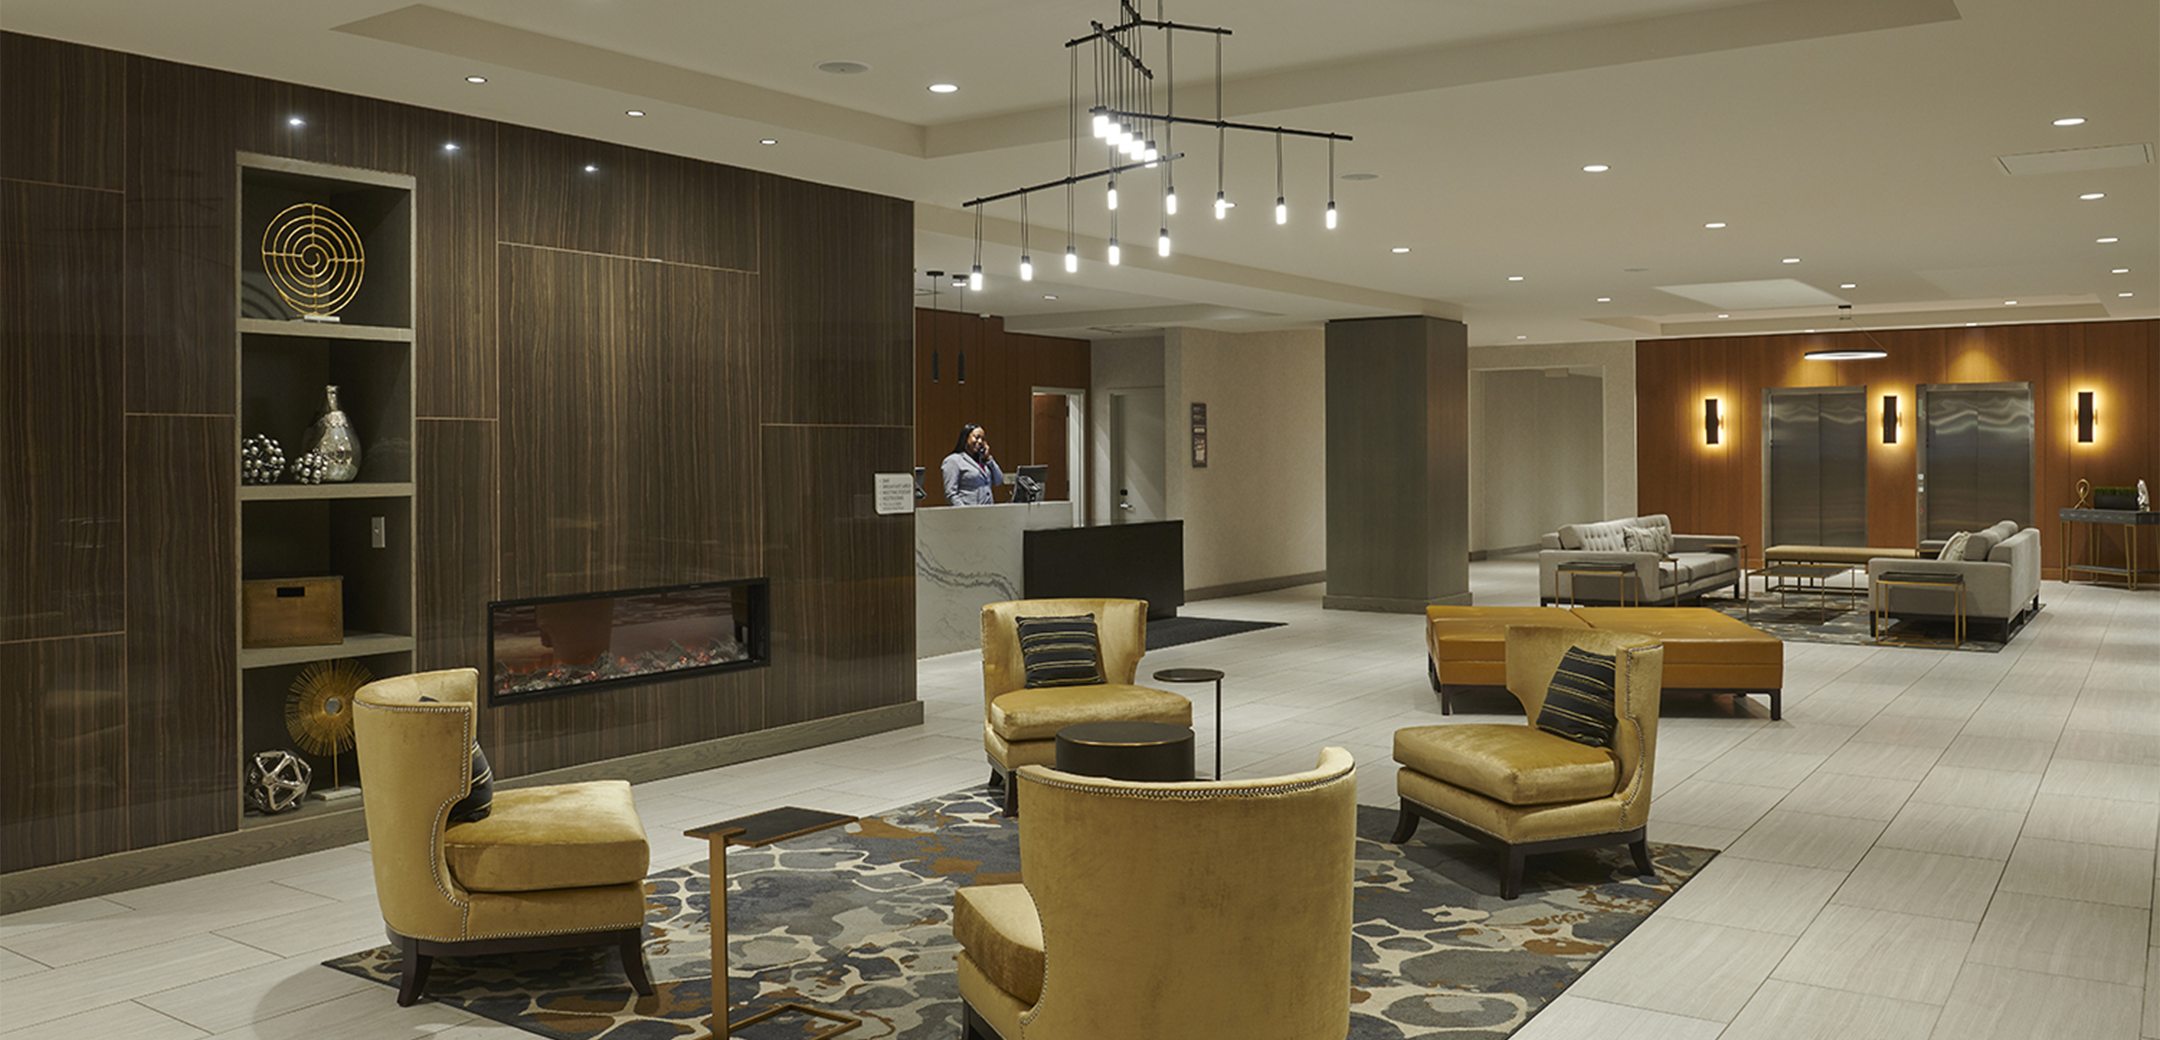 An interior image of the Hilton Garden Hotel foyer and reception lobby showcasing multiple seating areas, one near a fireplace and one near the elevators.